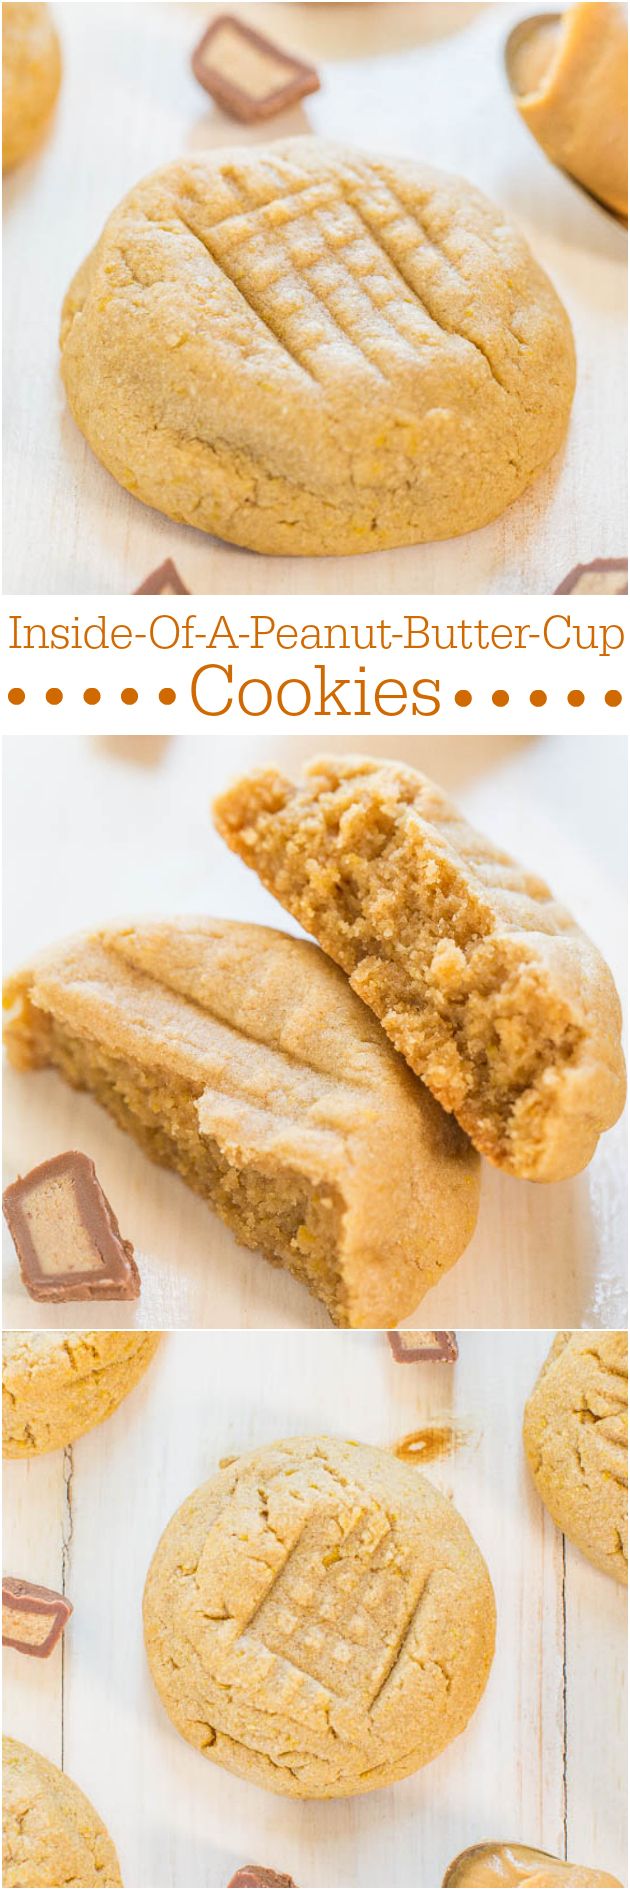 Inside-Of-A-Peanut-Butter-Cup Cookies — Soft peanut butter cookies that taste like the inside of peanut butter cups thanks to a special ingredient! Yum!!!